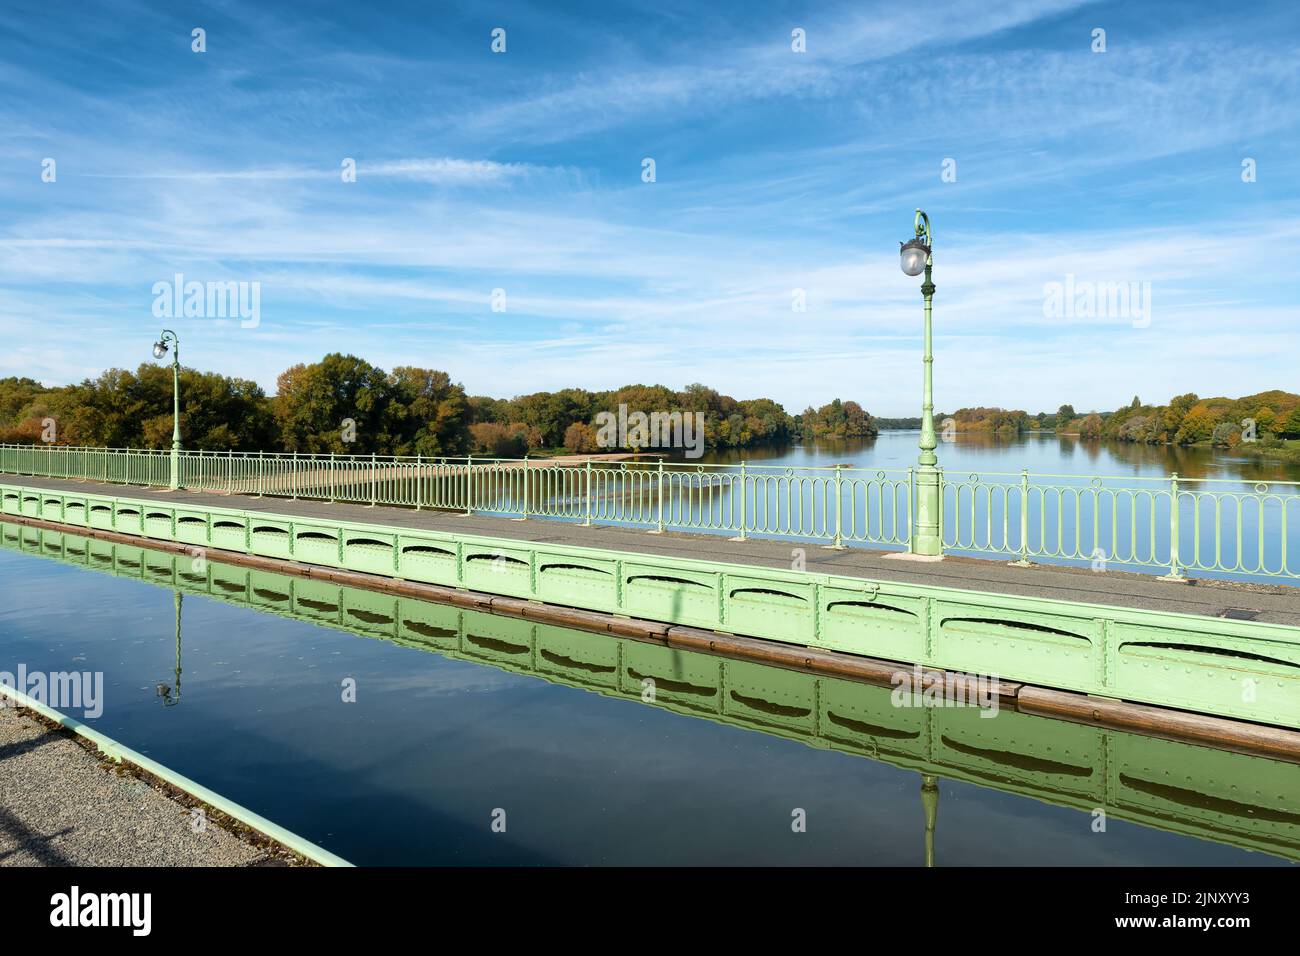 The Briare Aqueduct in central France carries a canal over the river Loire on its journey to the Seine. Stock Photo